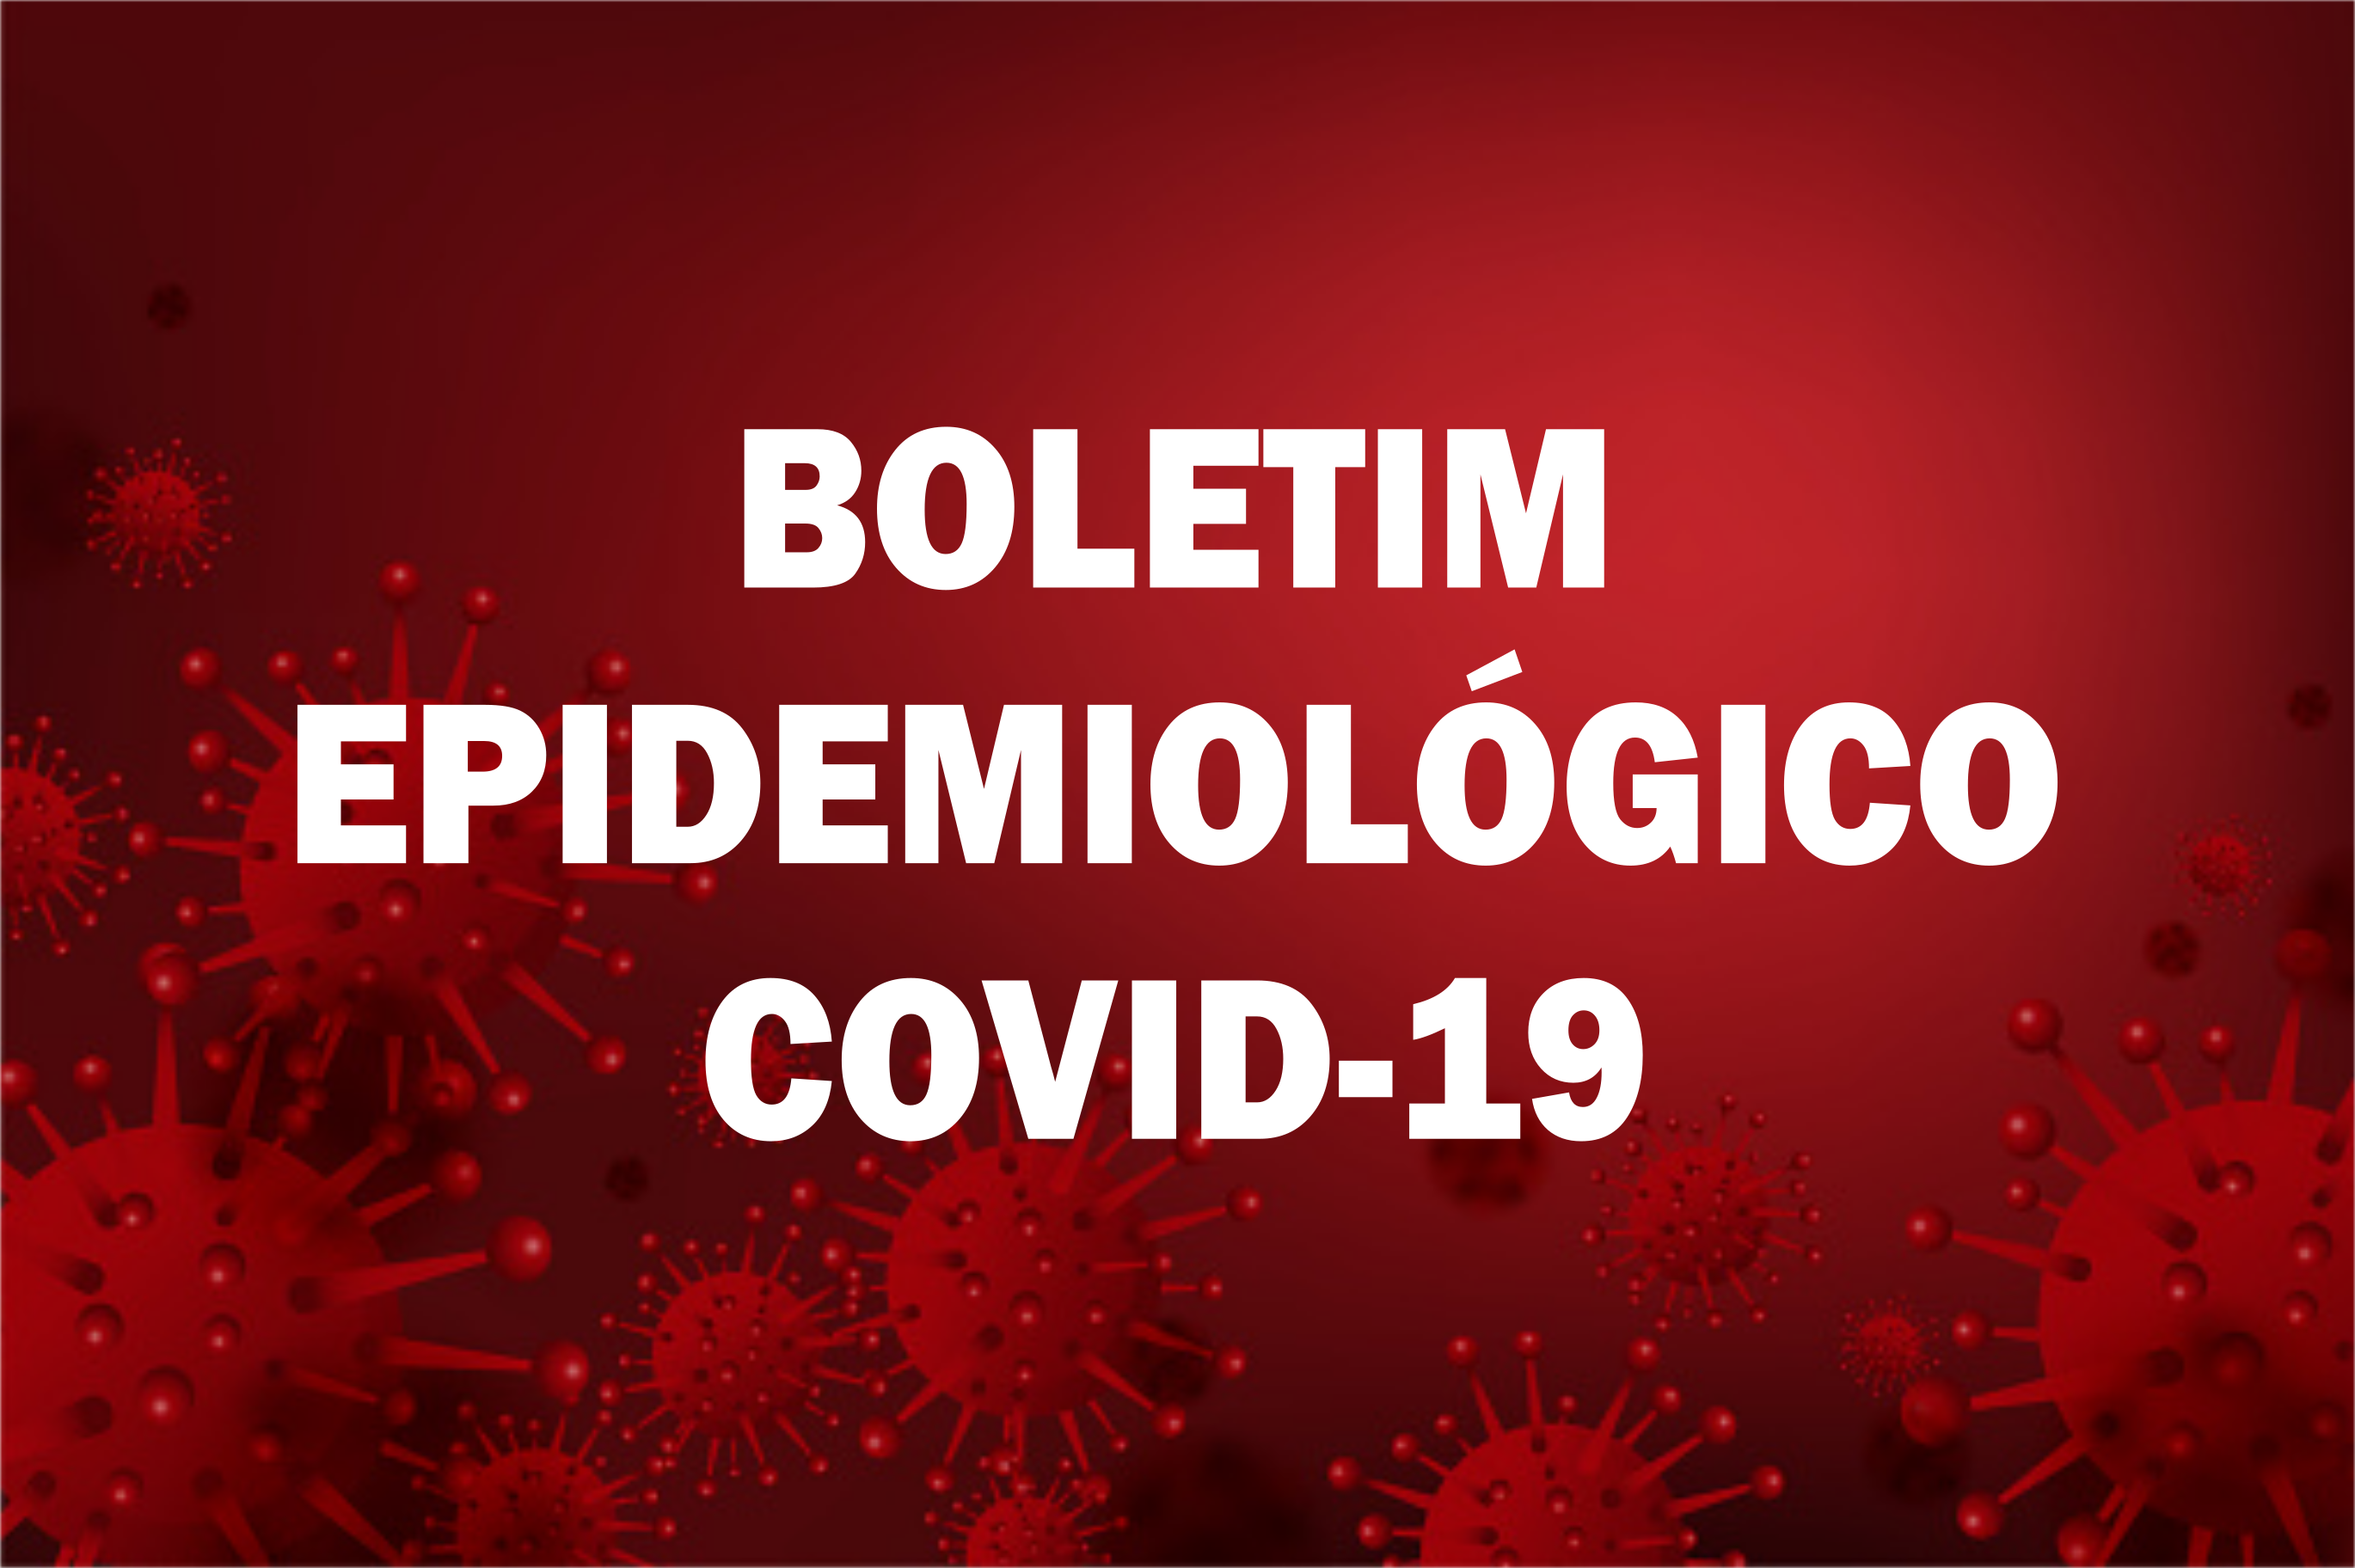 You are currently viewing BOLETIM EPIDEMIOLÓGICO Nº 127 (COVID-19)